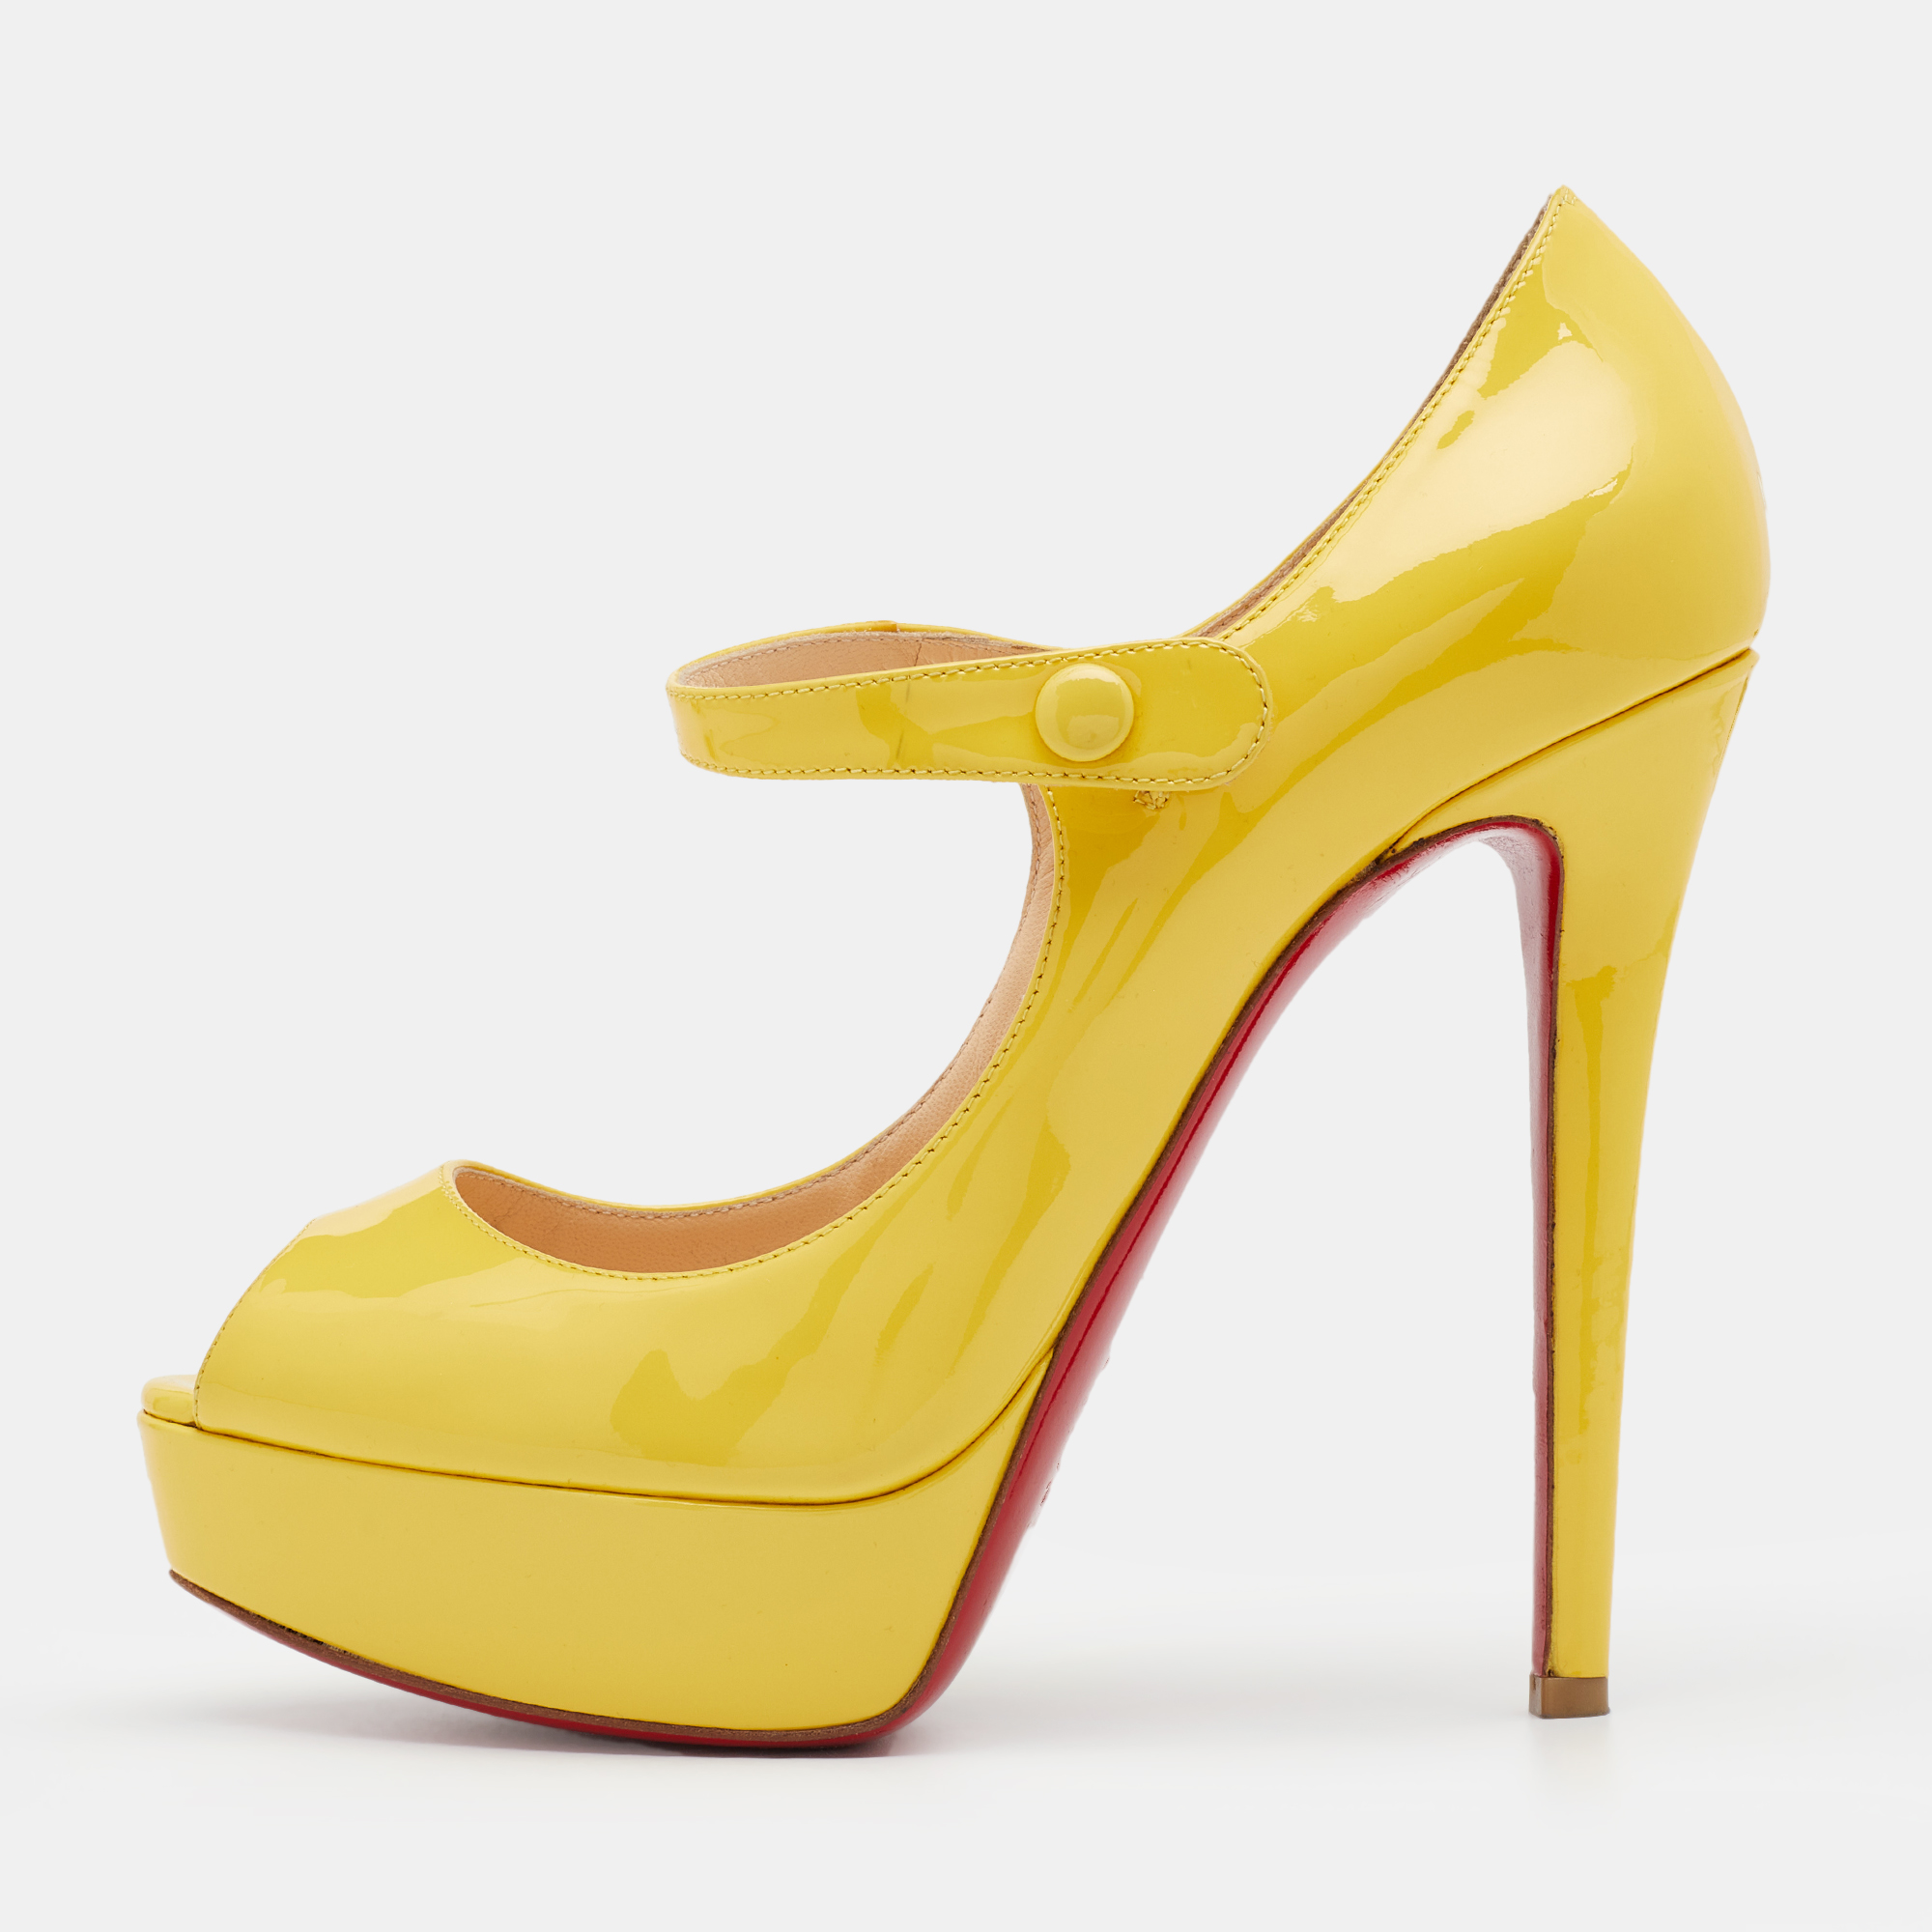 This pair of pumps by Christian Louboutin will let you make the most amazing style statement. Showcase the latest trends in fashion when you wear this pair yellow leather pumps that are designed in a Mary Jane style with high heels and peep toes. This pair of yellow pumps are complete with signature red soles.